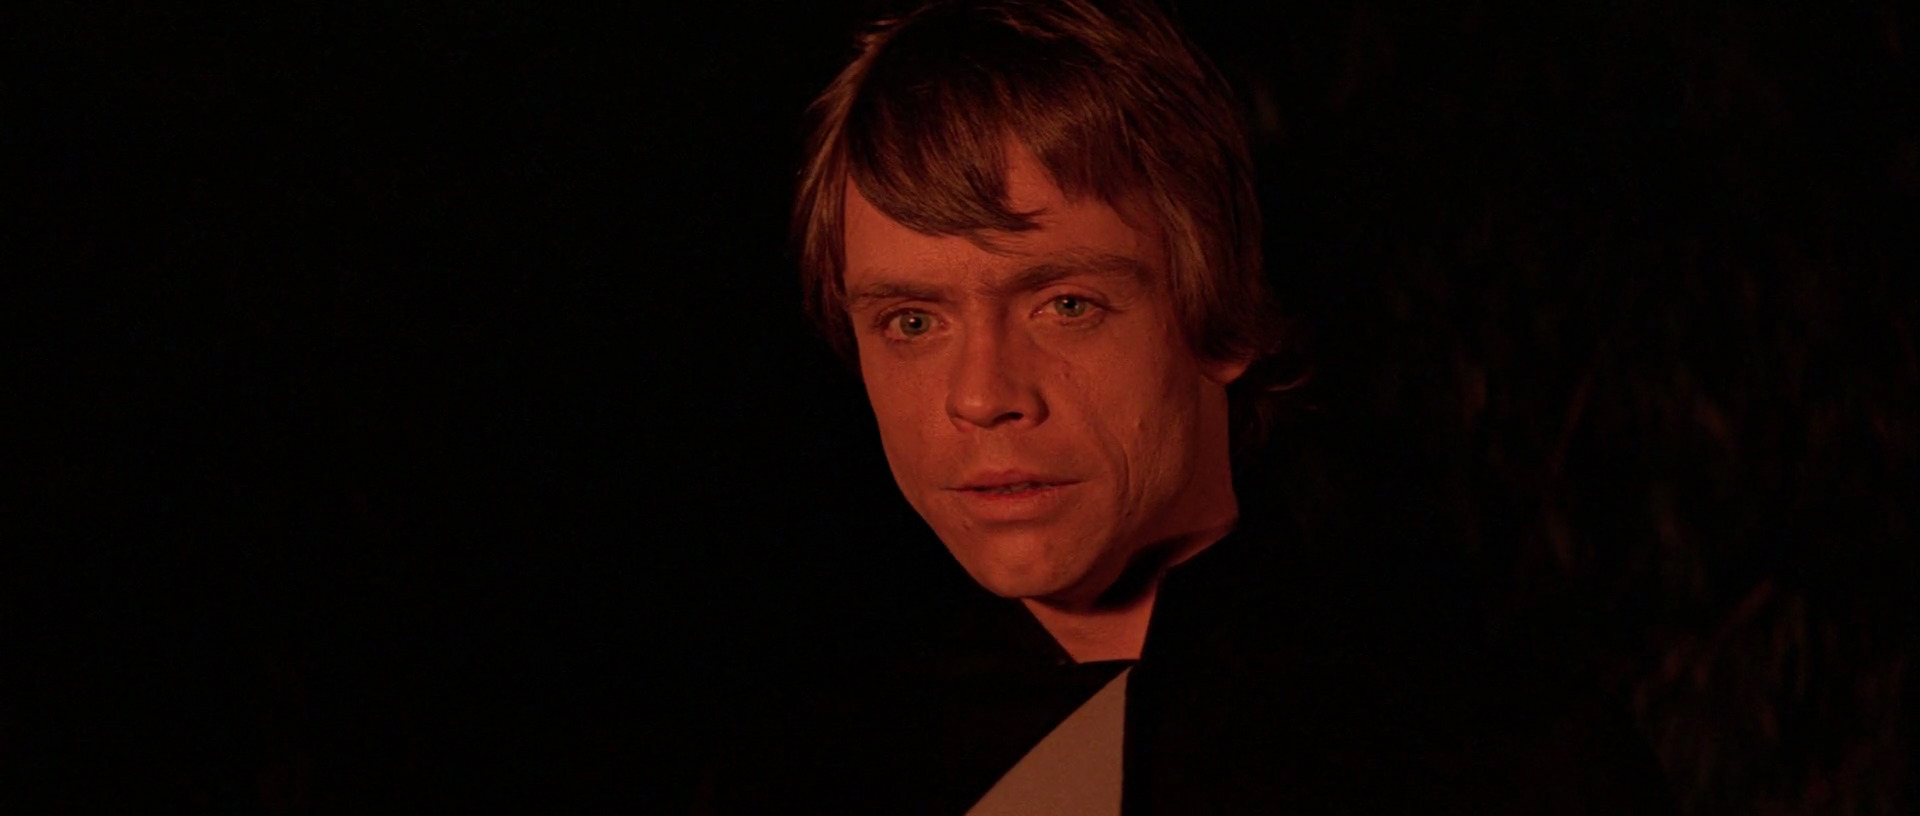 Star Wars: The Force Awakens - Here's What Happened To Luke Skywalker After Return of the Jedi [Updated]